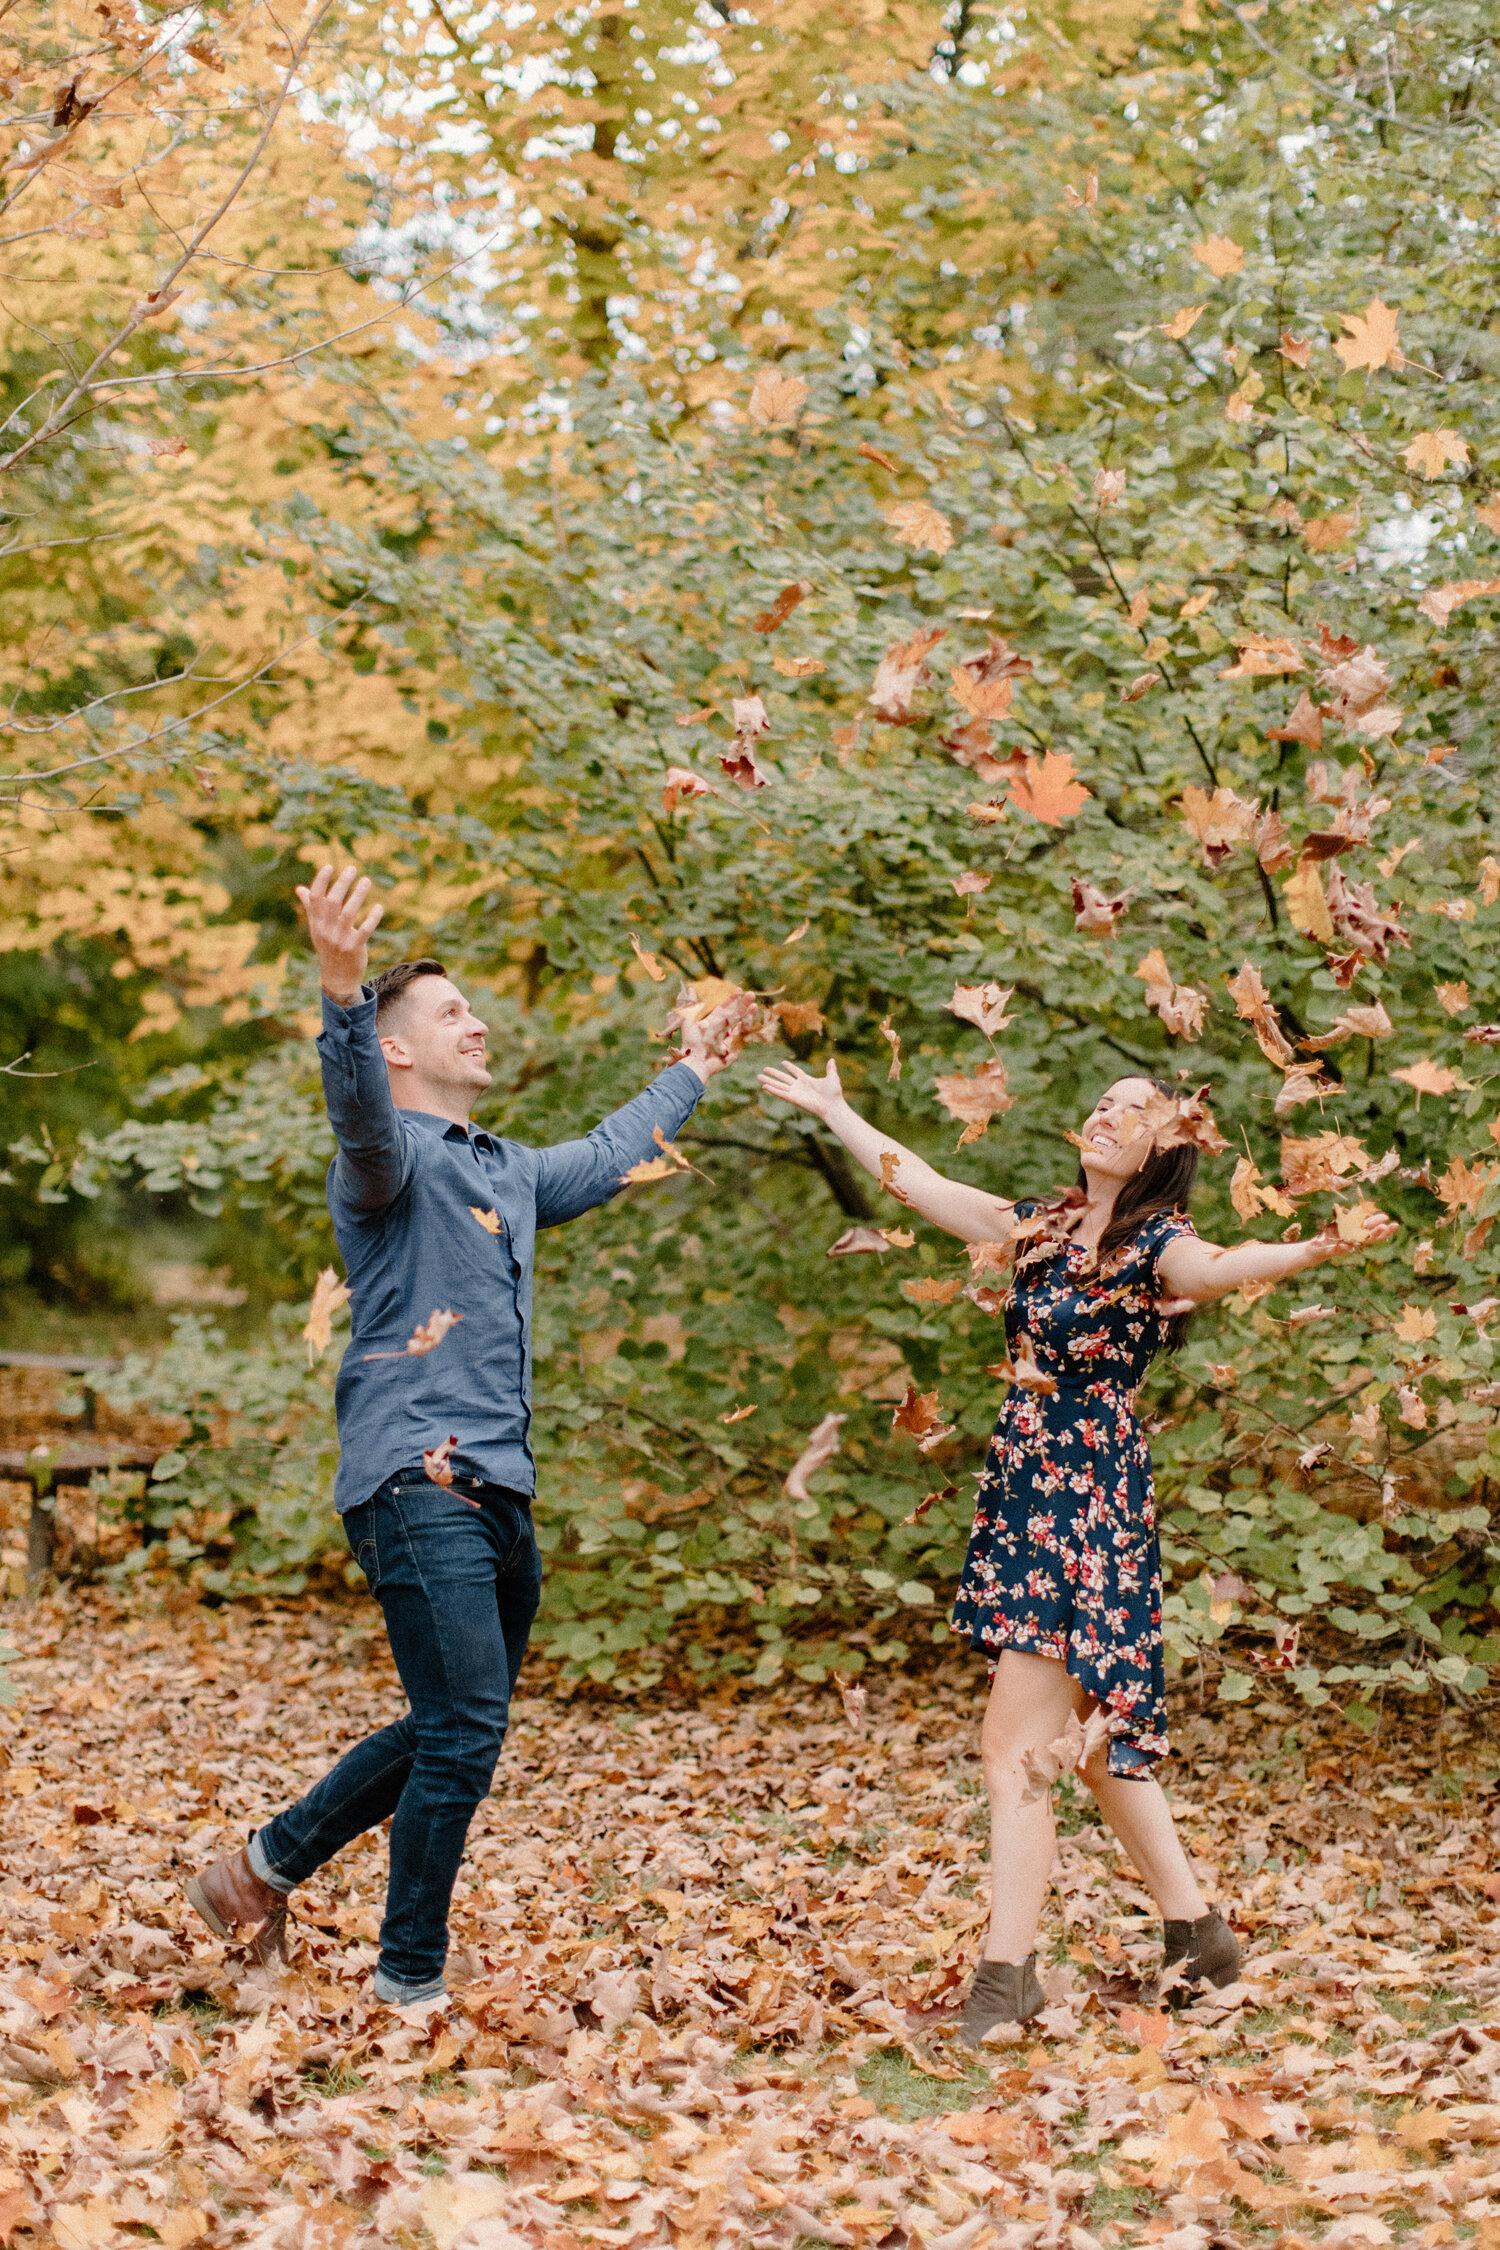  With a wooded forrest blurred in the backdrop, Chelsea Mason Photography captures this man giving his fiance a piggy back ride during their engagement session in Brockville, Ontario. brockville ontario engagement photographer playful couple poses au